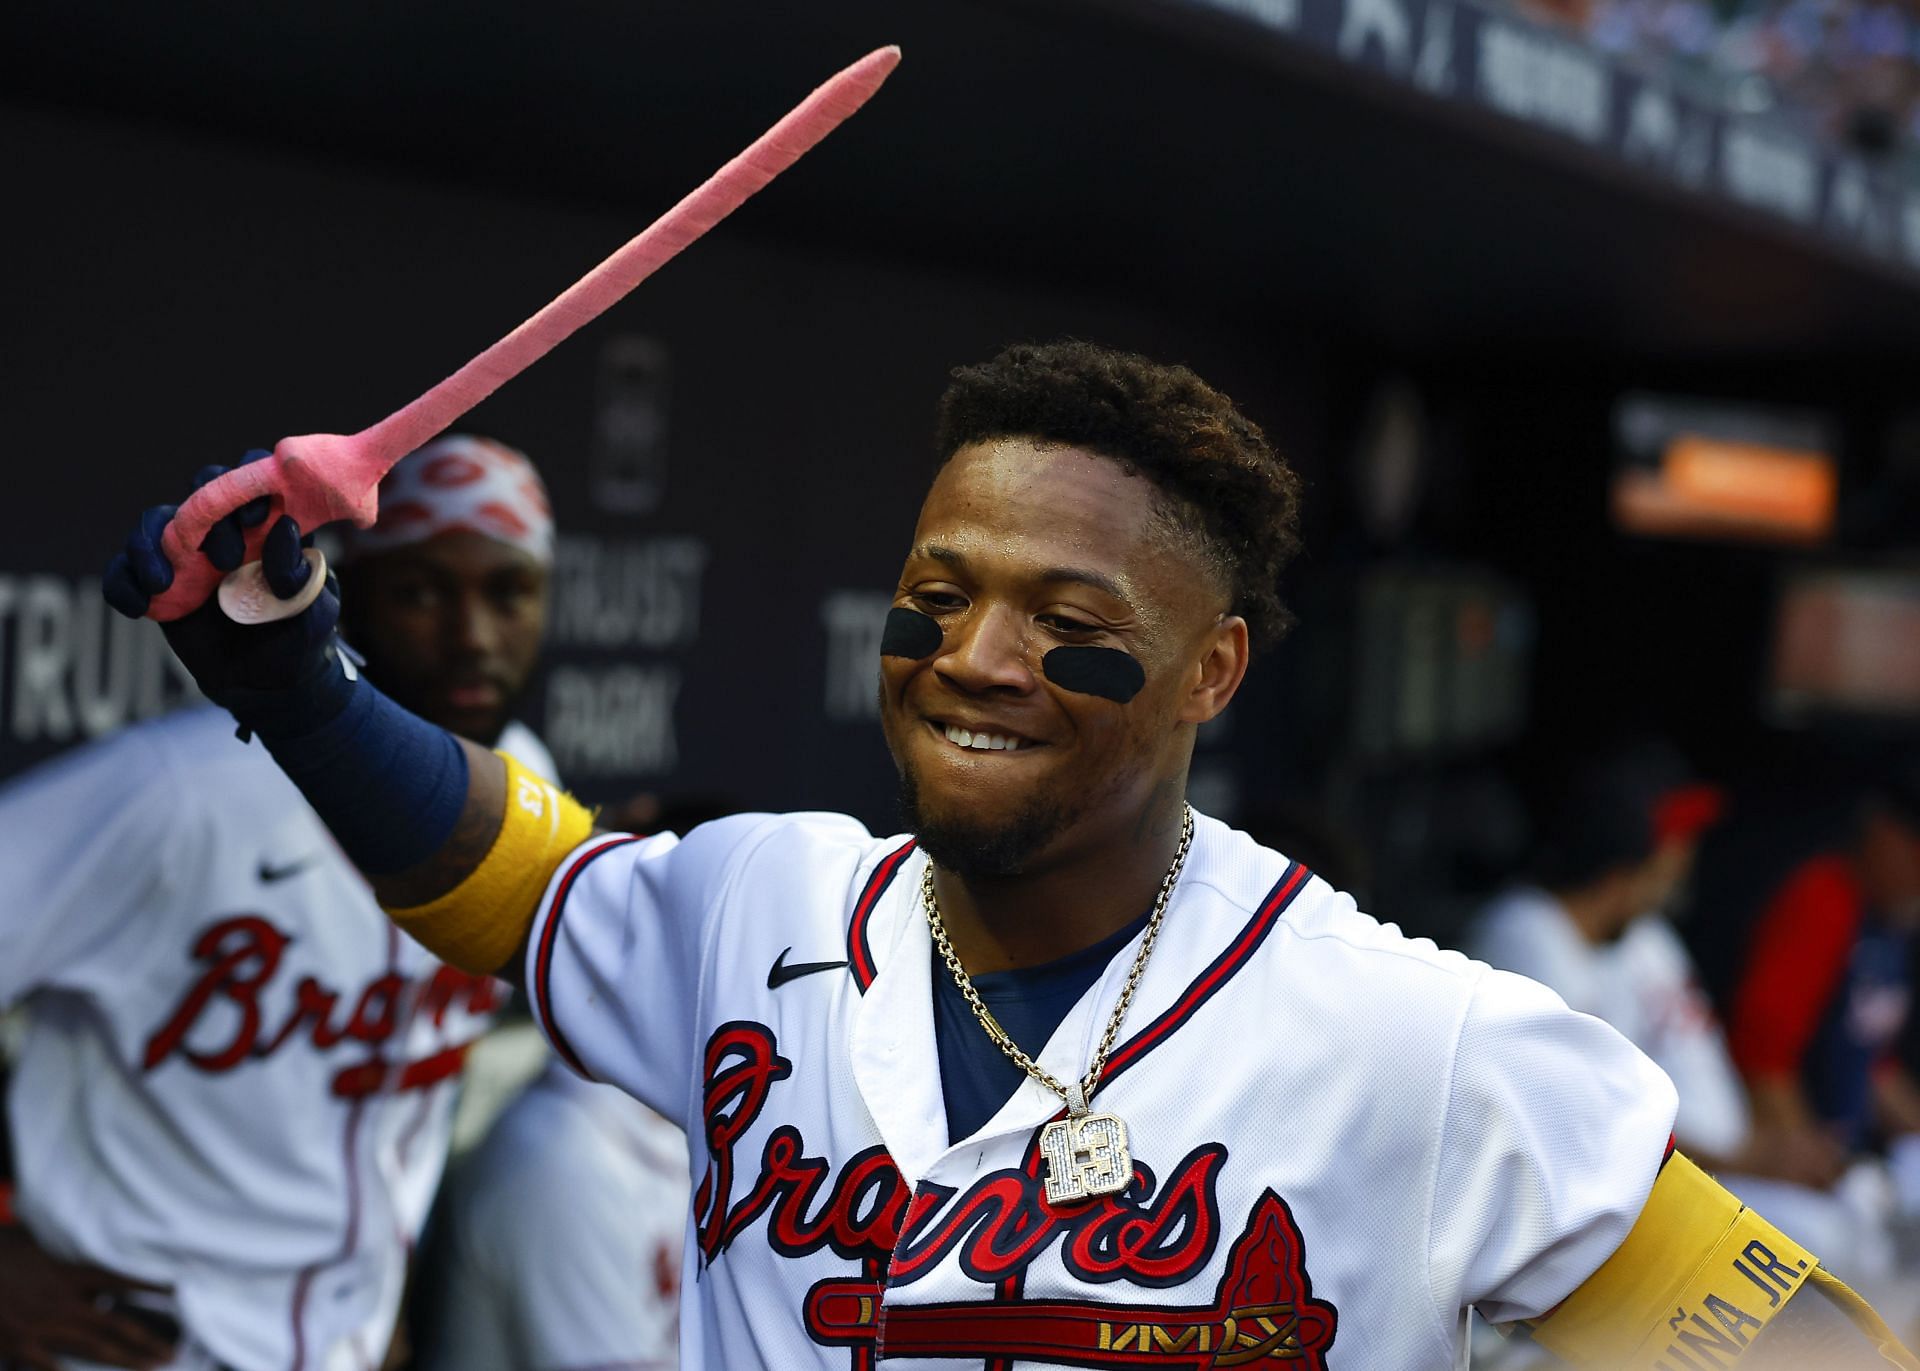 Ronald Acuna Jr. has three home runs in the last two games.